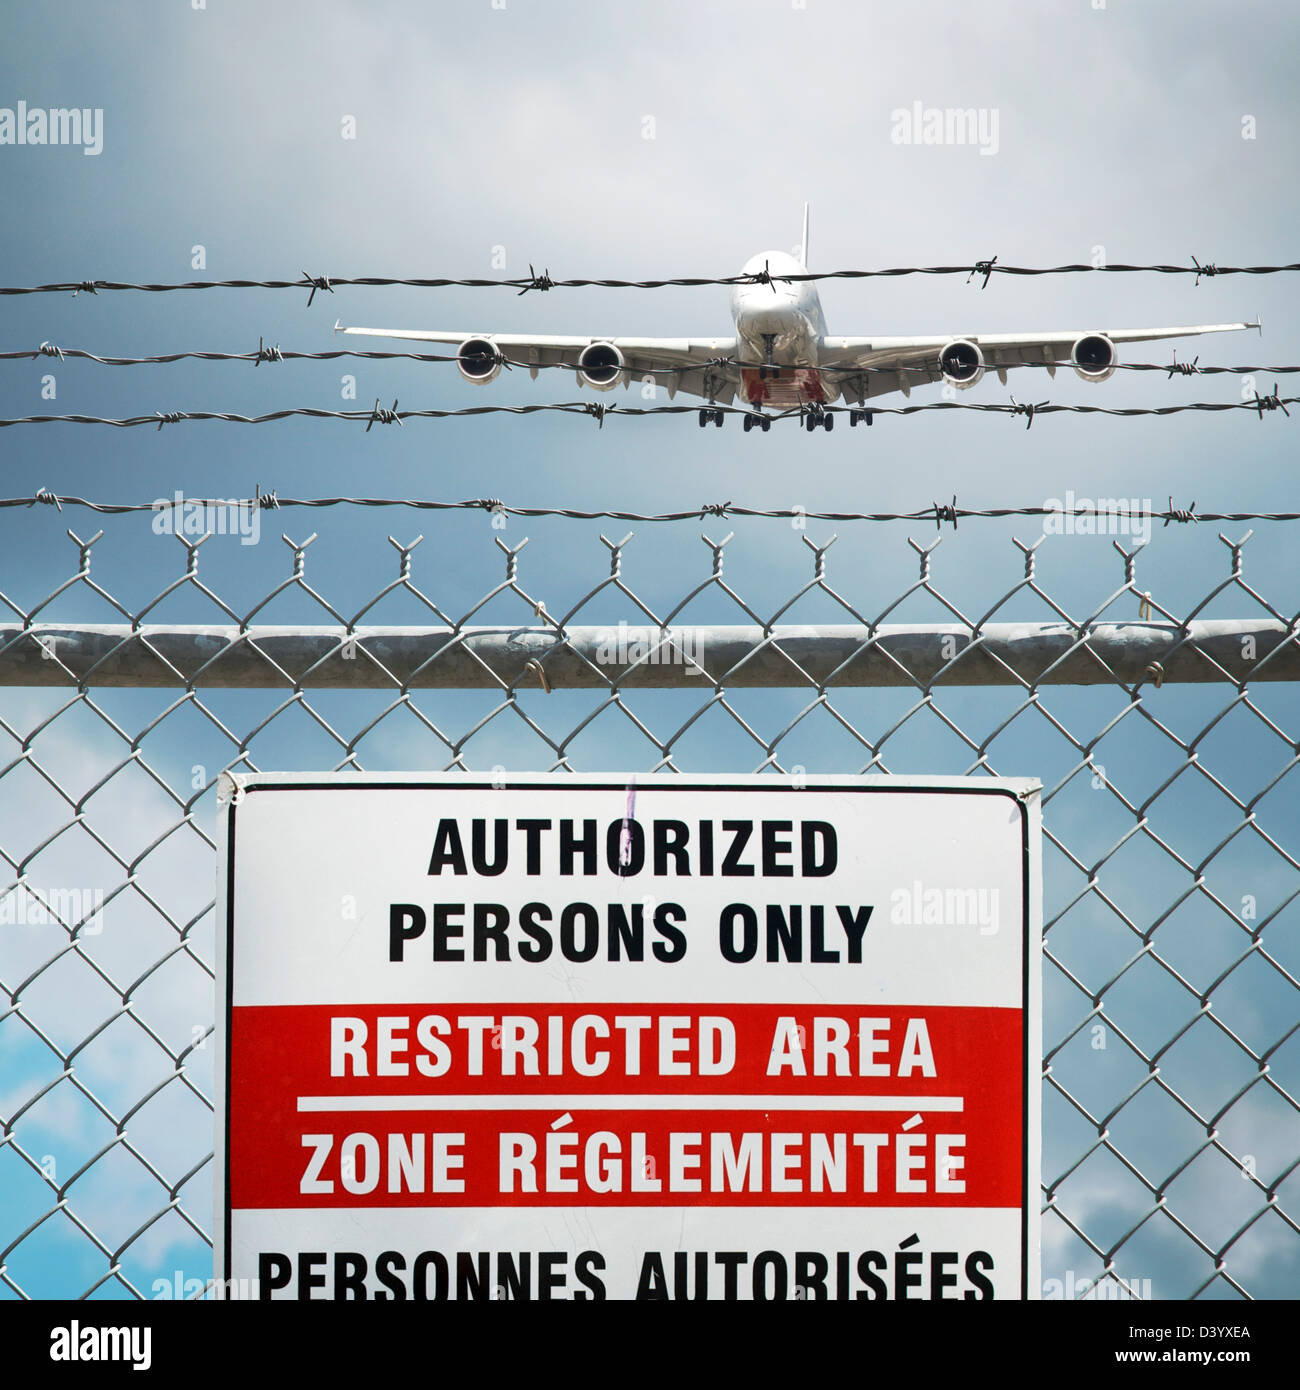 Jumbo Jet and Restricted Area Sign on Chain Link Fence with Barbed Wire, Pearson International Airport, Toronto, Ontario, Canada Stock Photo